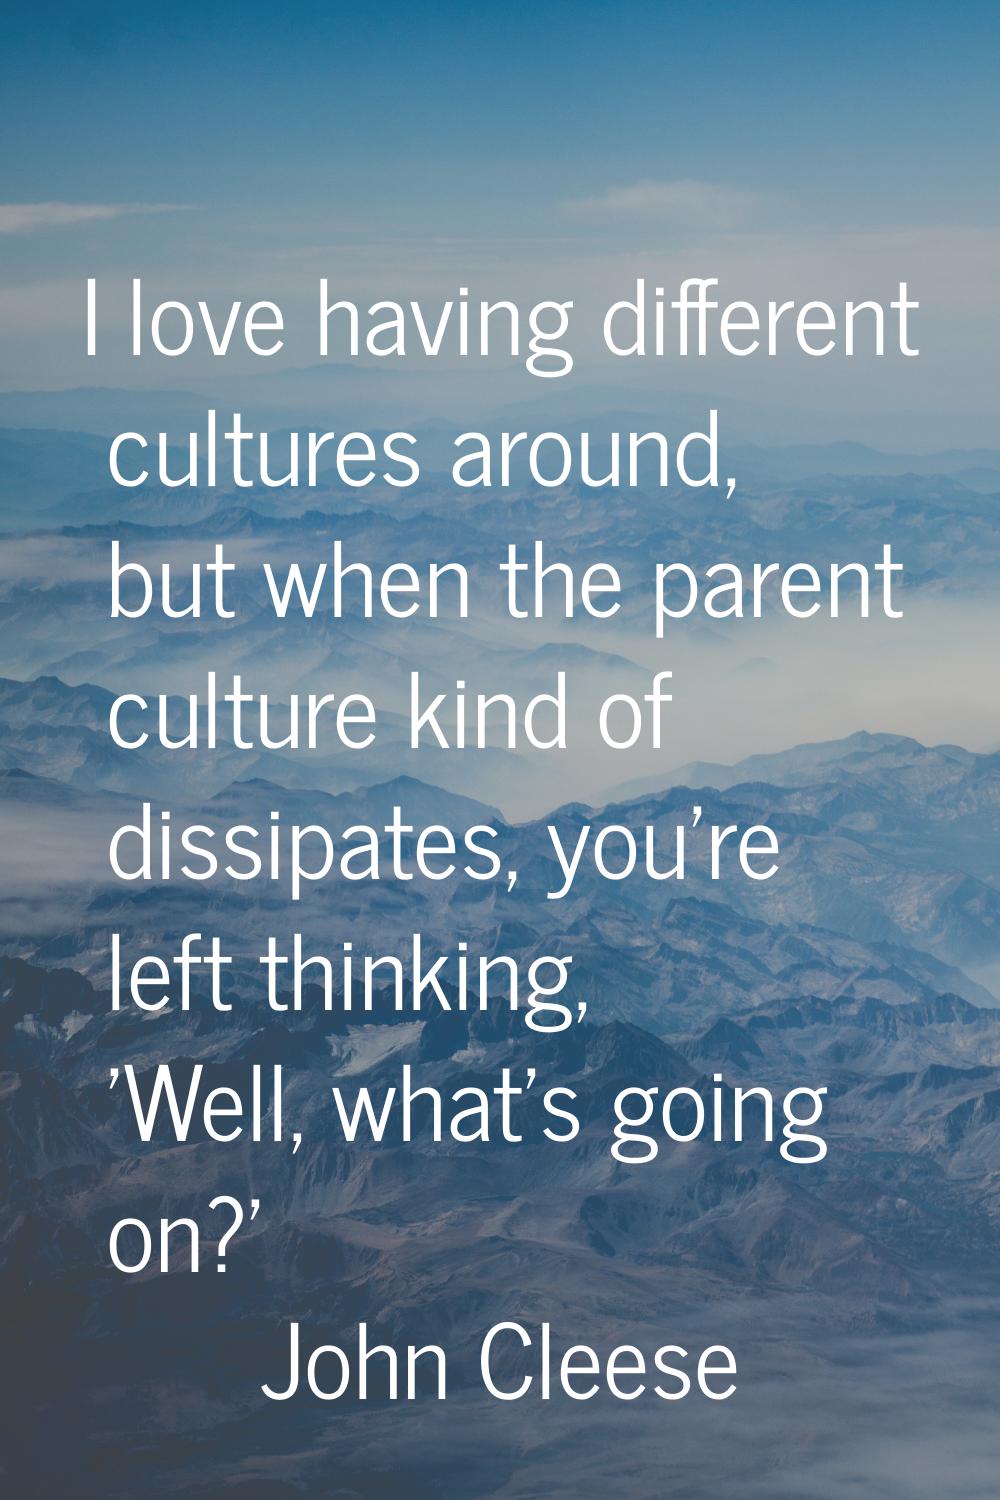 I love having different cultures around, but when the parent culture kind of dissipates, you're lef